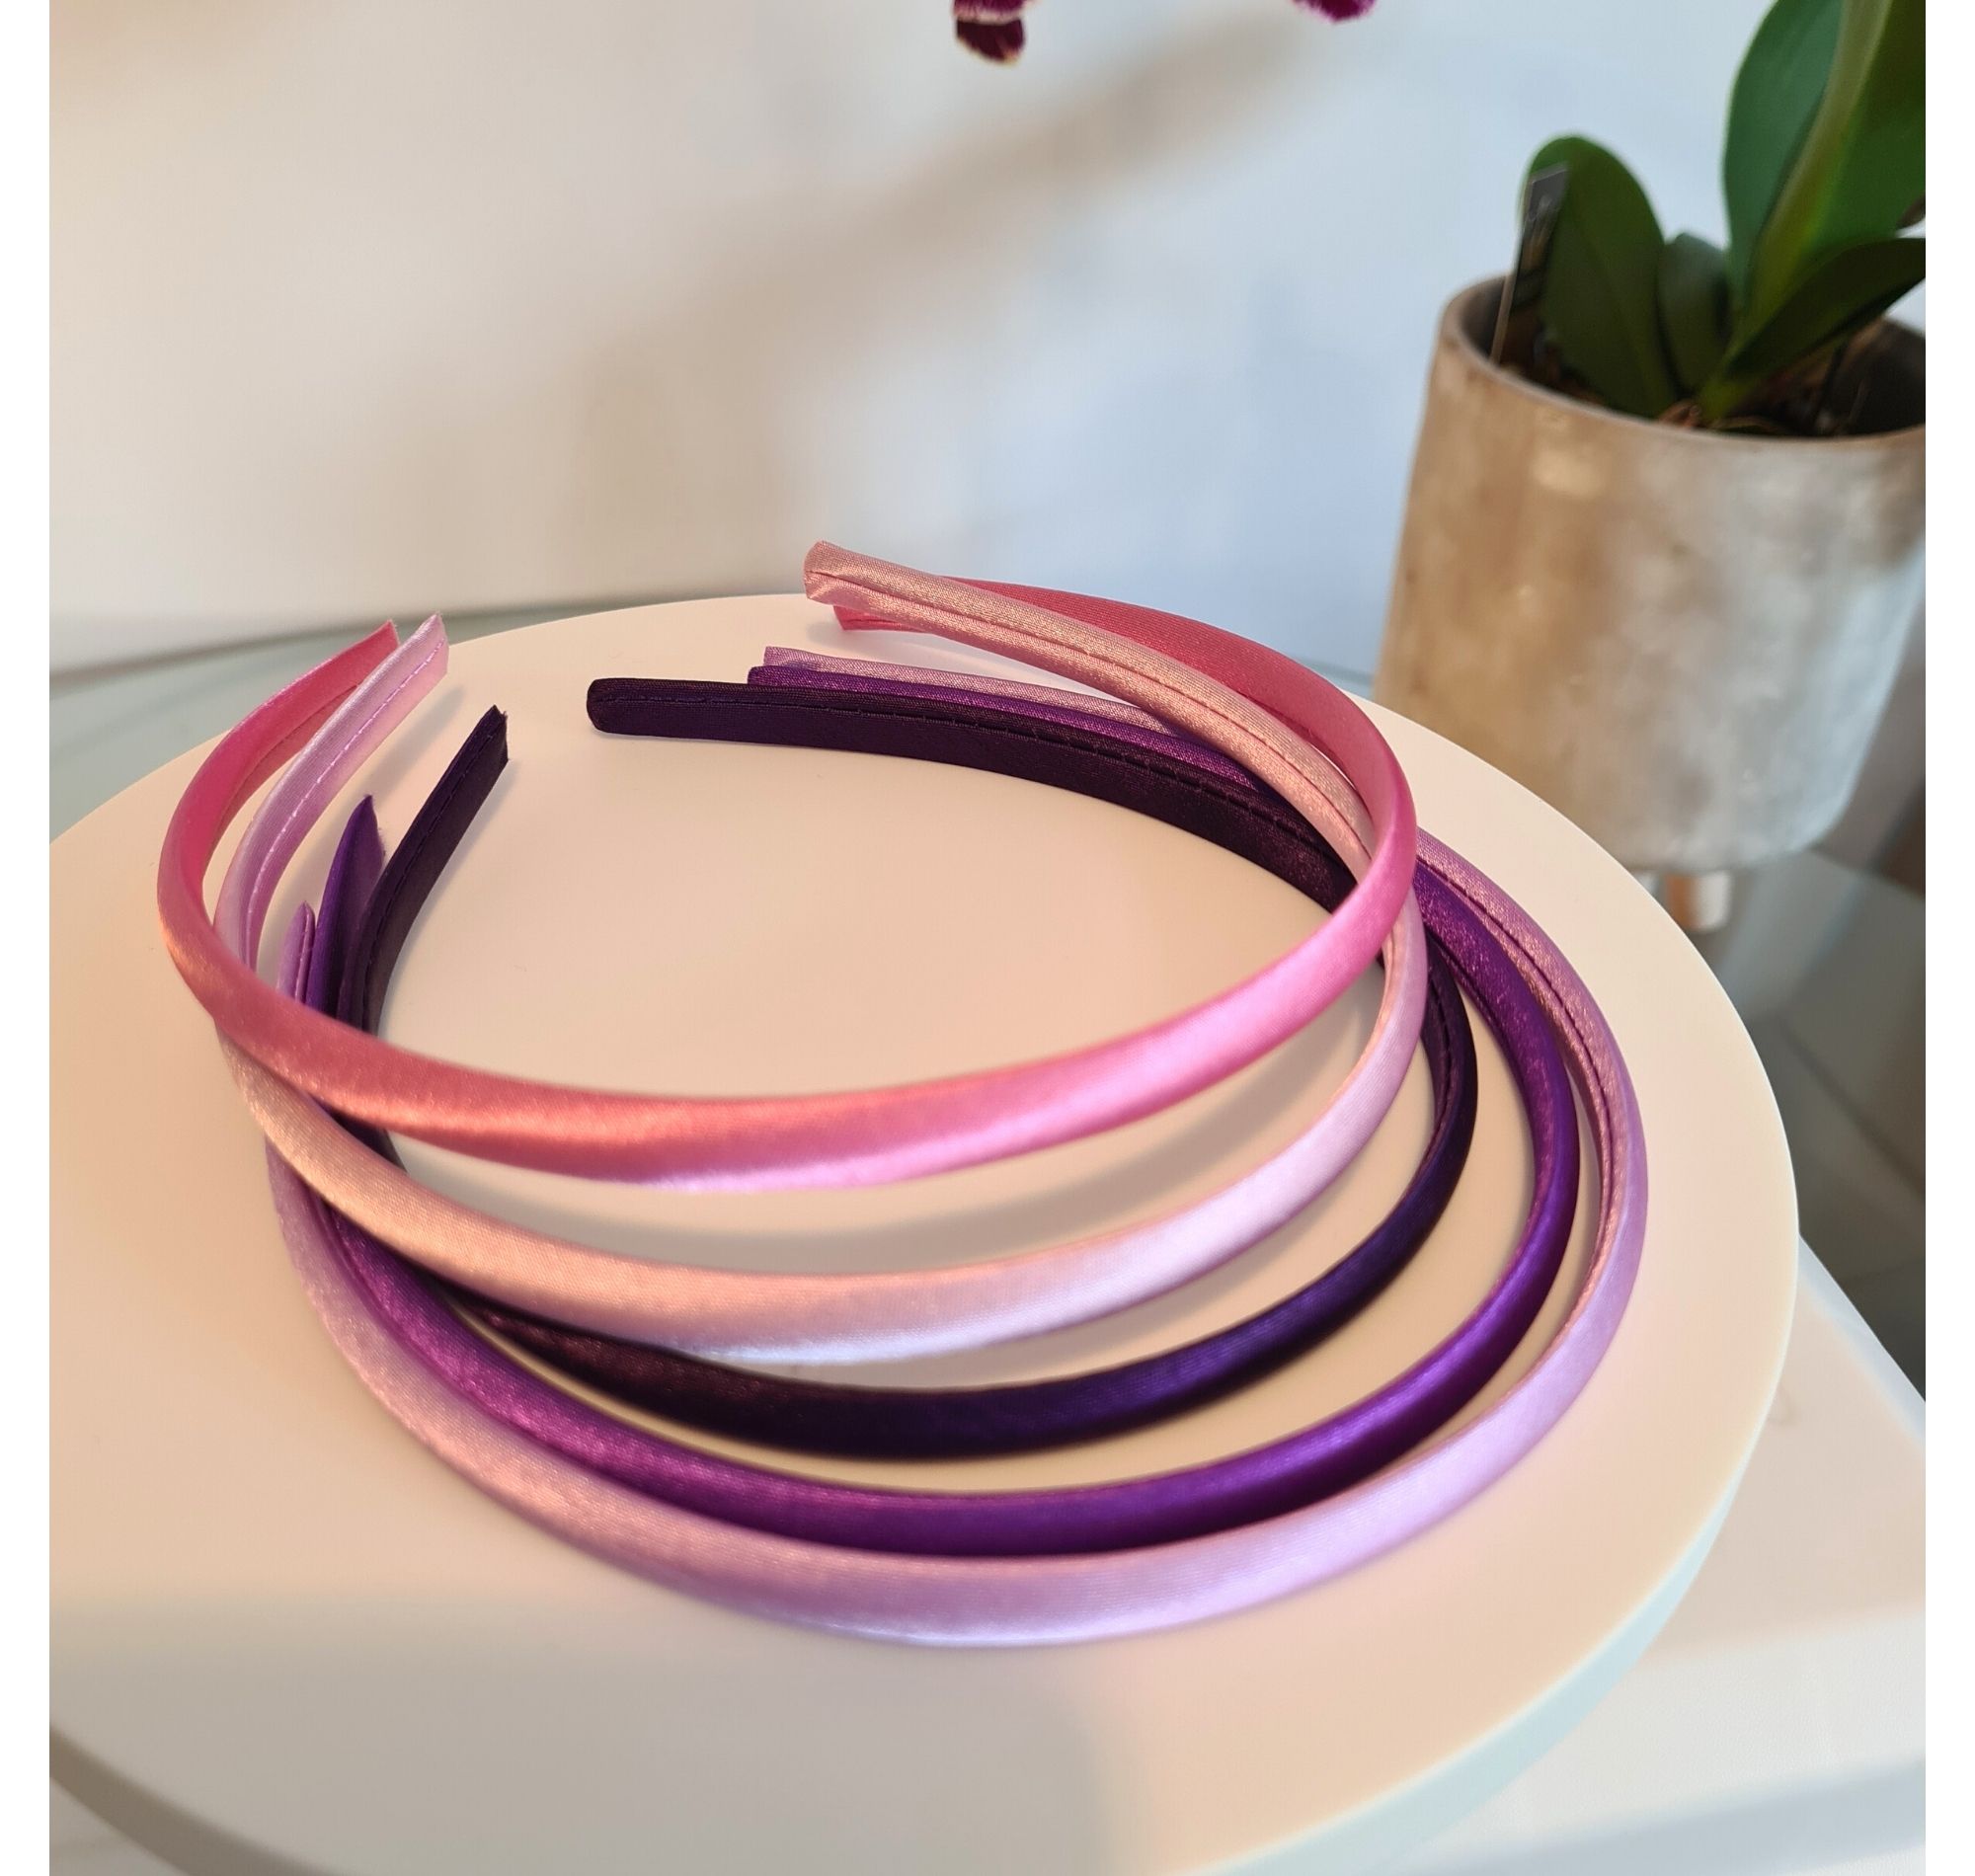 Hair Bands in Pink Satin Fabric